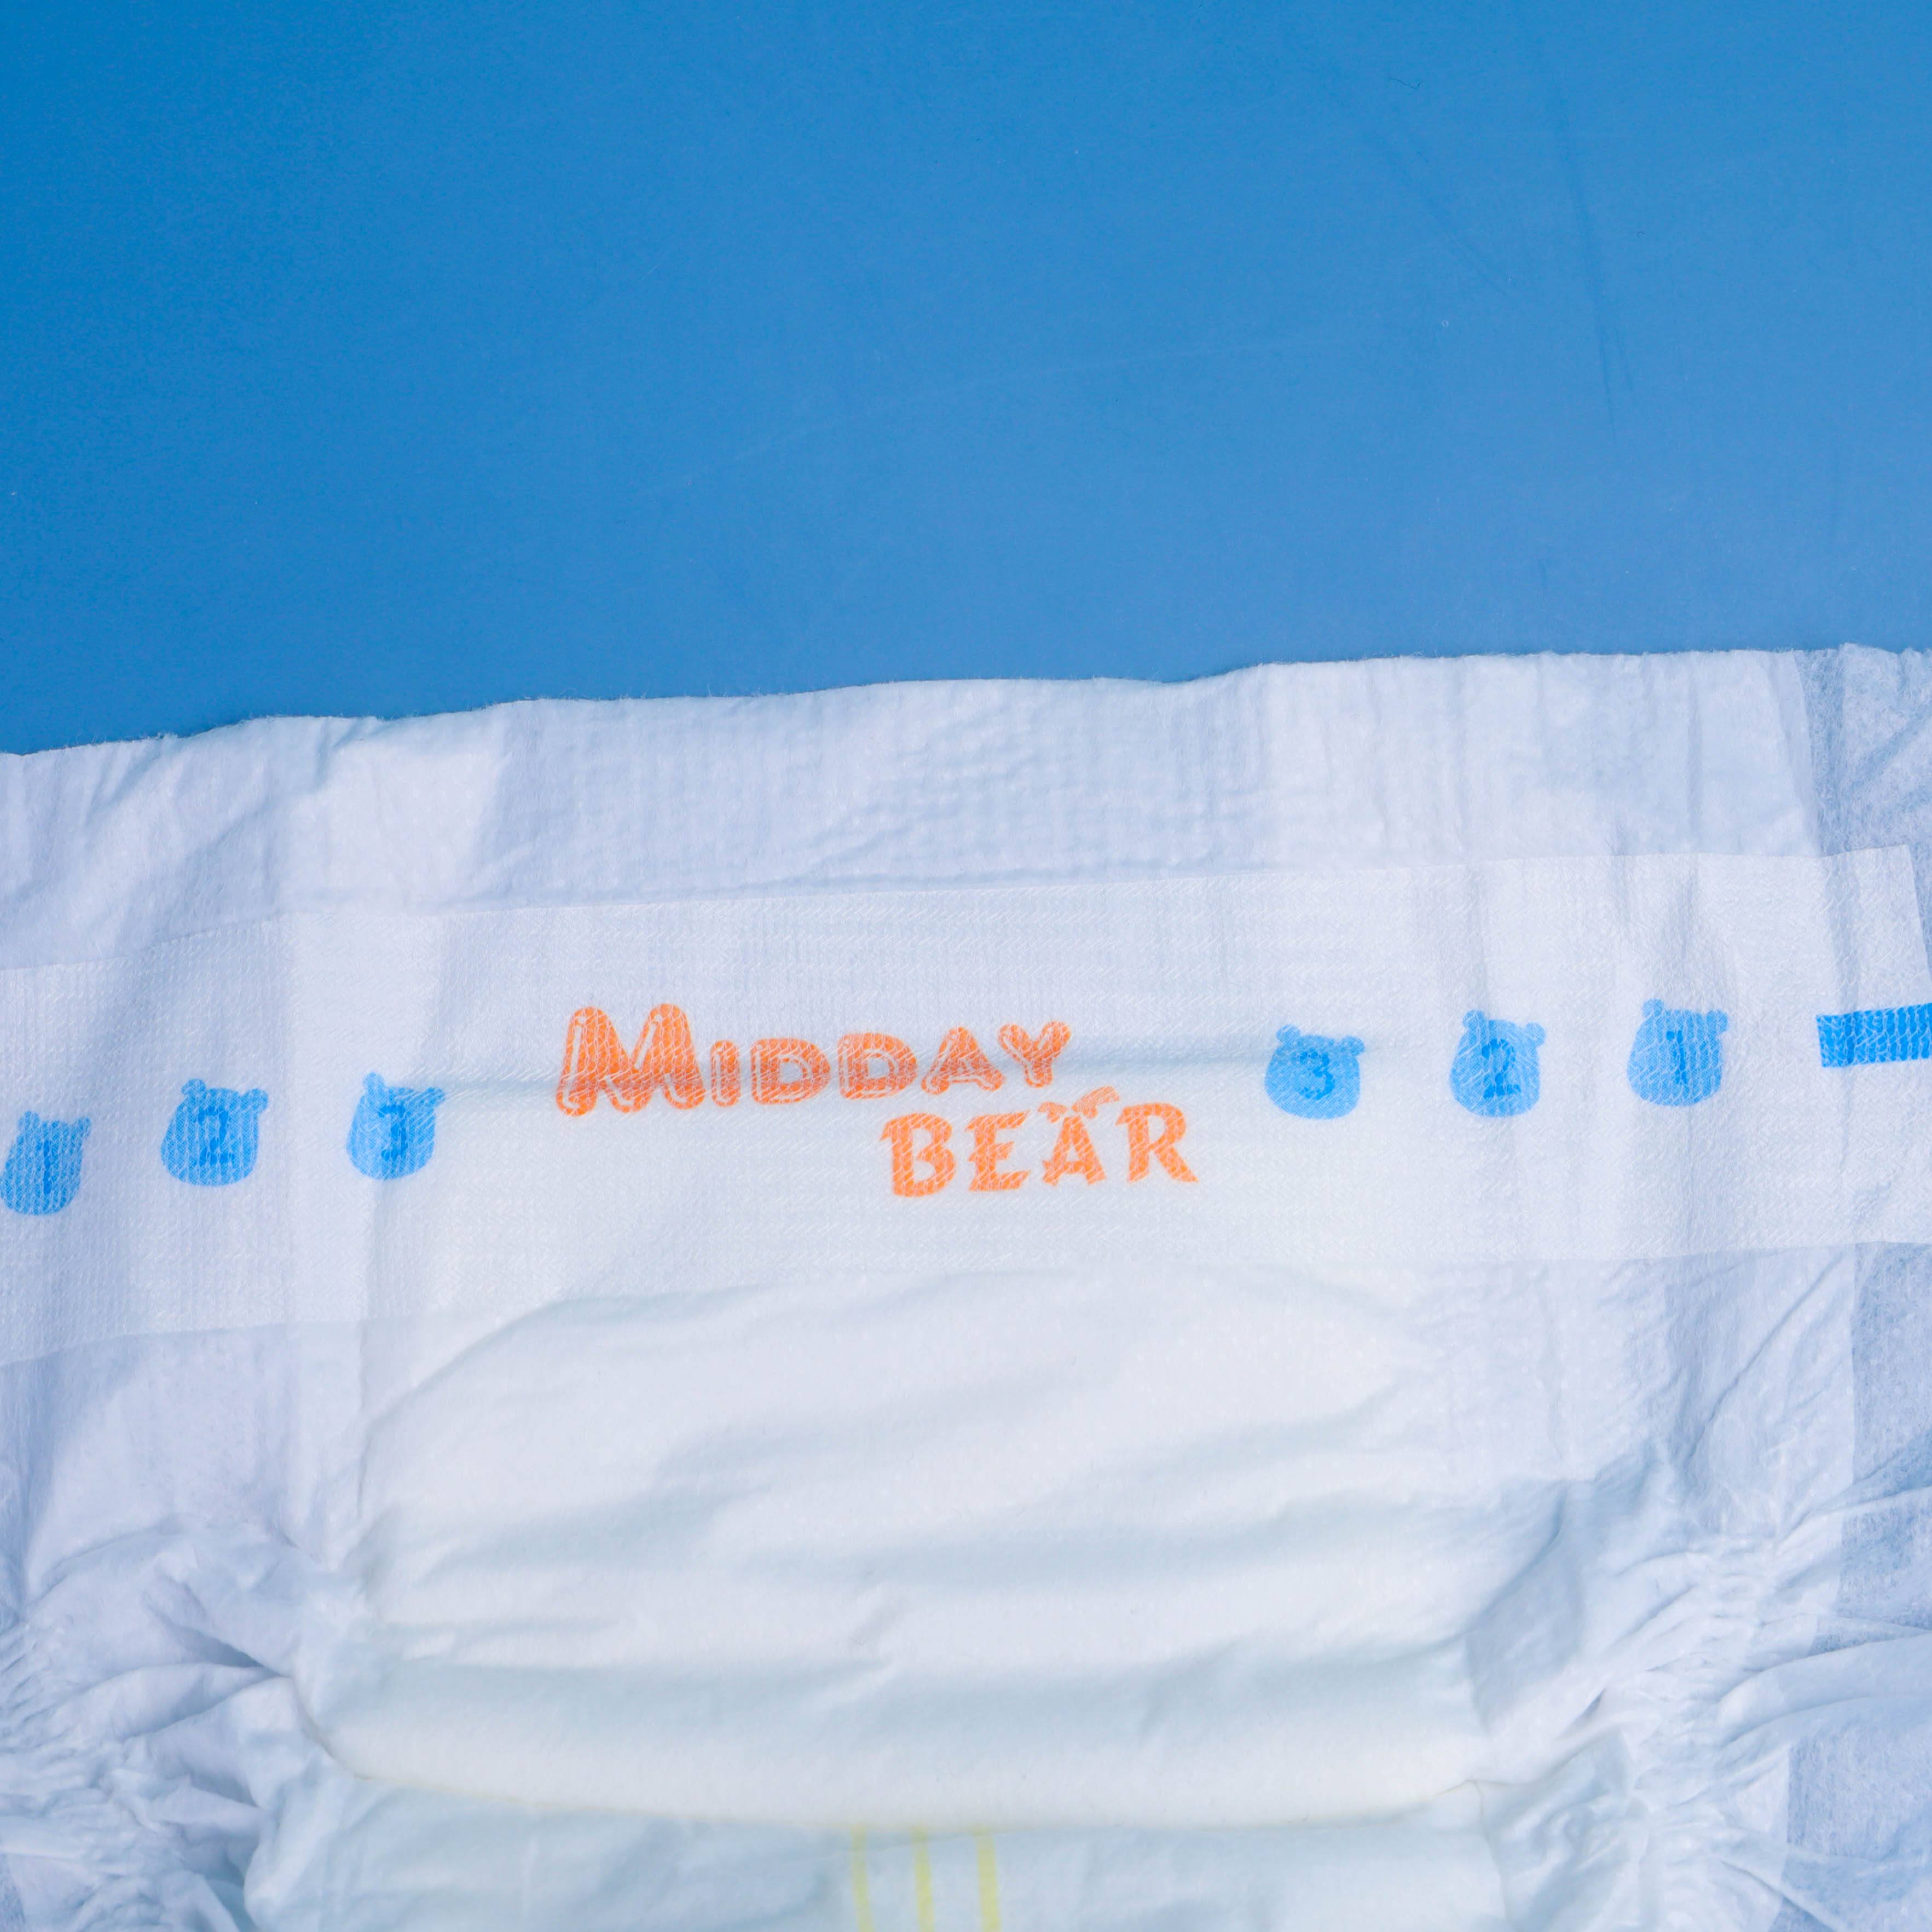 Midday Bear Adult diaper company introduces how to choose adult diapers